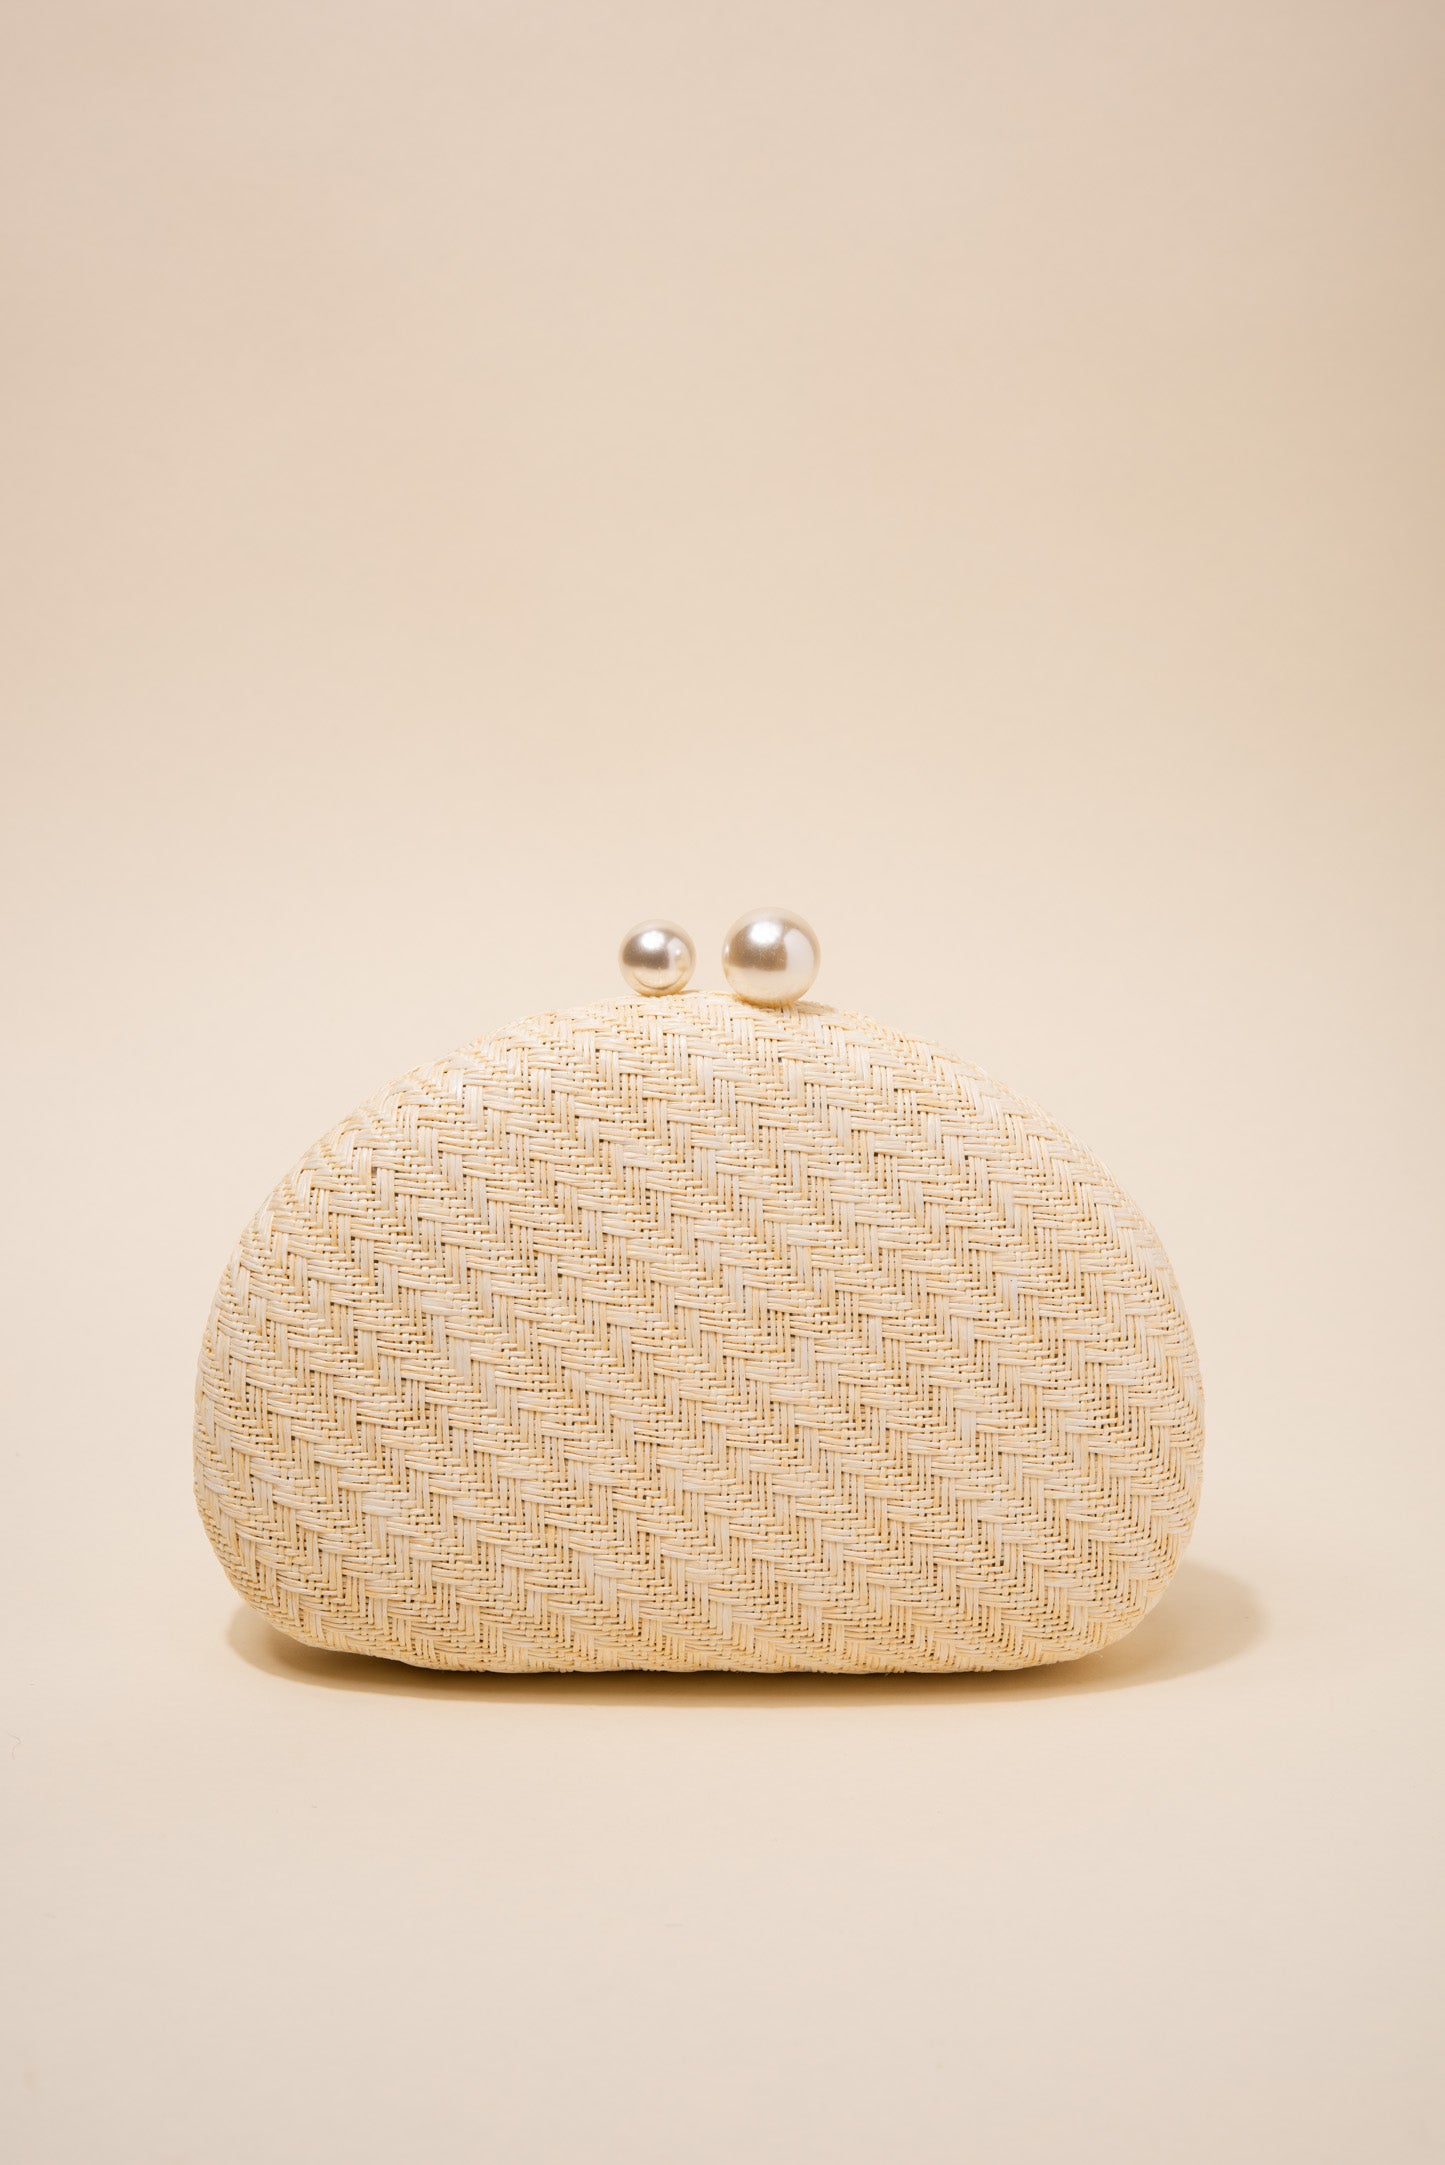 Marcella Rounded Woven Textured Evening Box Clutch Purse w/ Pearl Closure and Strap - Ivory